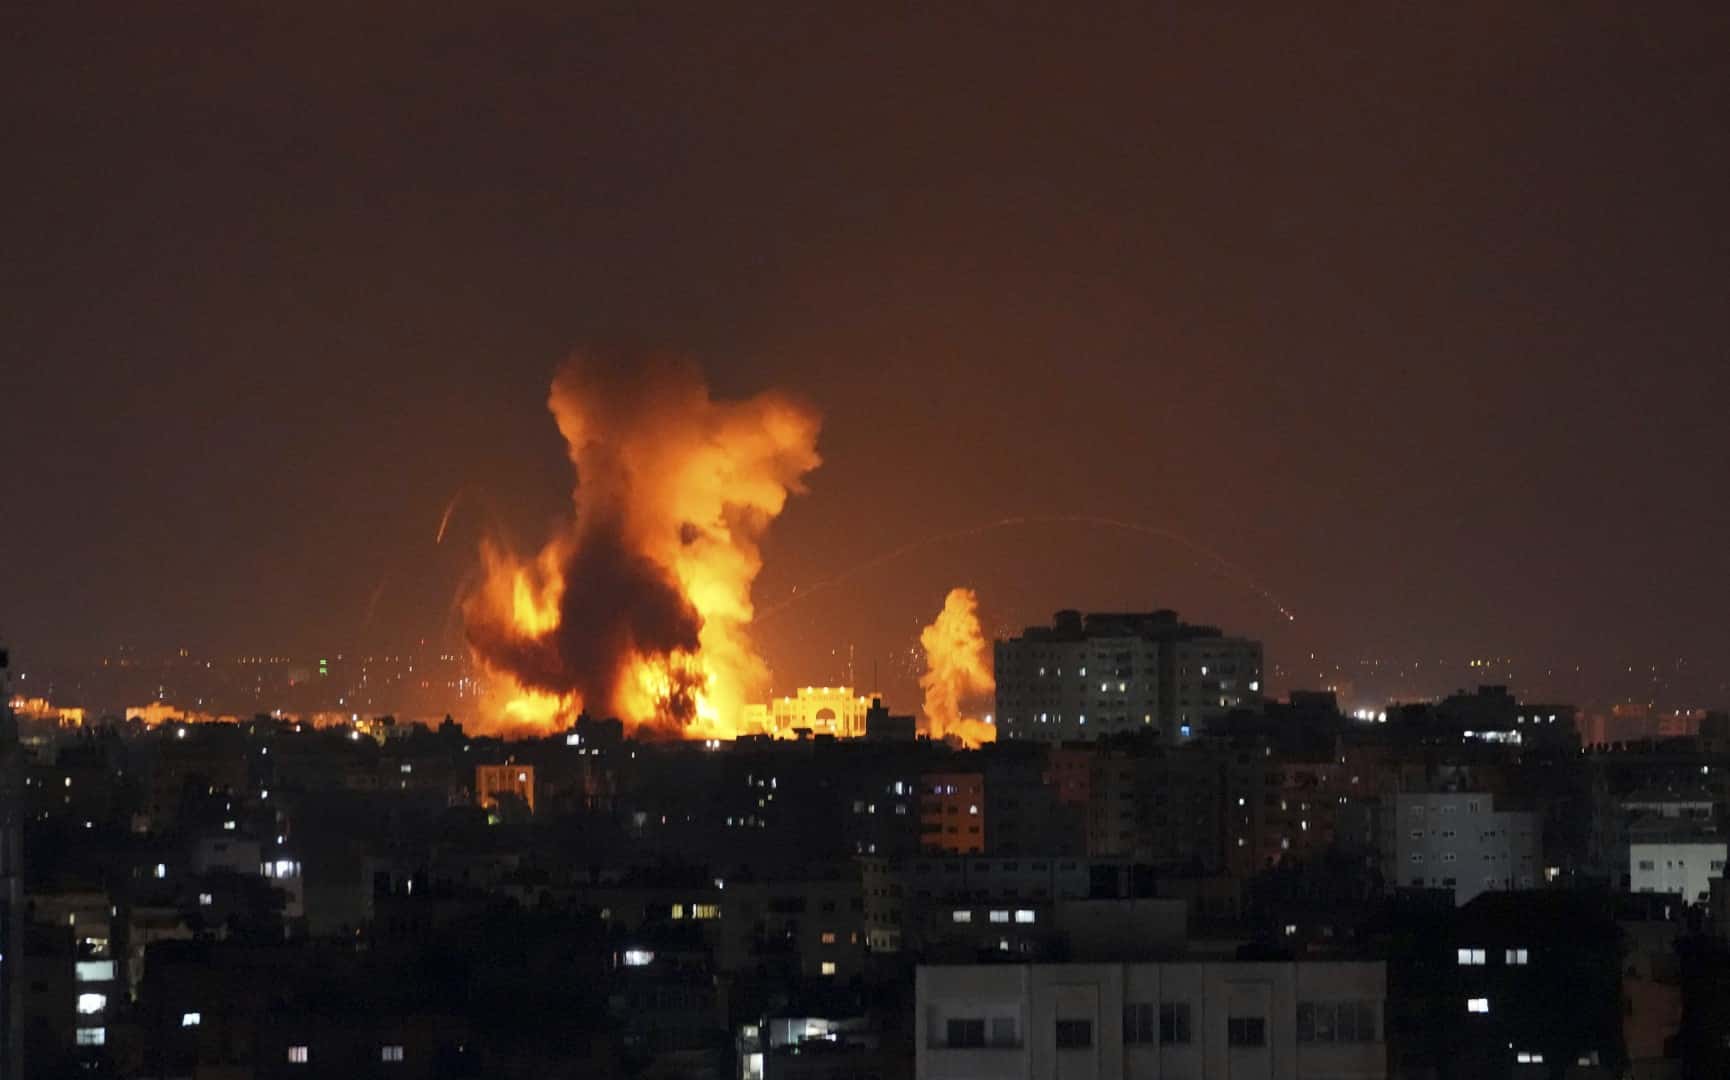 israel's aggression Smoke rises following Israeli airstrikes on a building in Gaza City, Friday, Aug. 5, 2022. Palestinian officials say Israeli airstrikes on Gaza have killed several people, including a senior militant, and wounded 40 others.